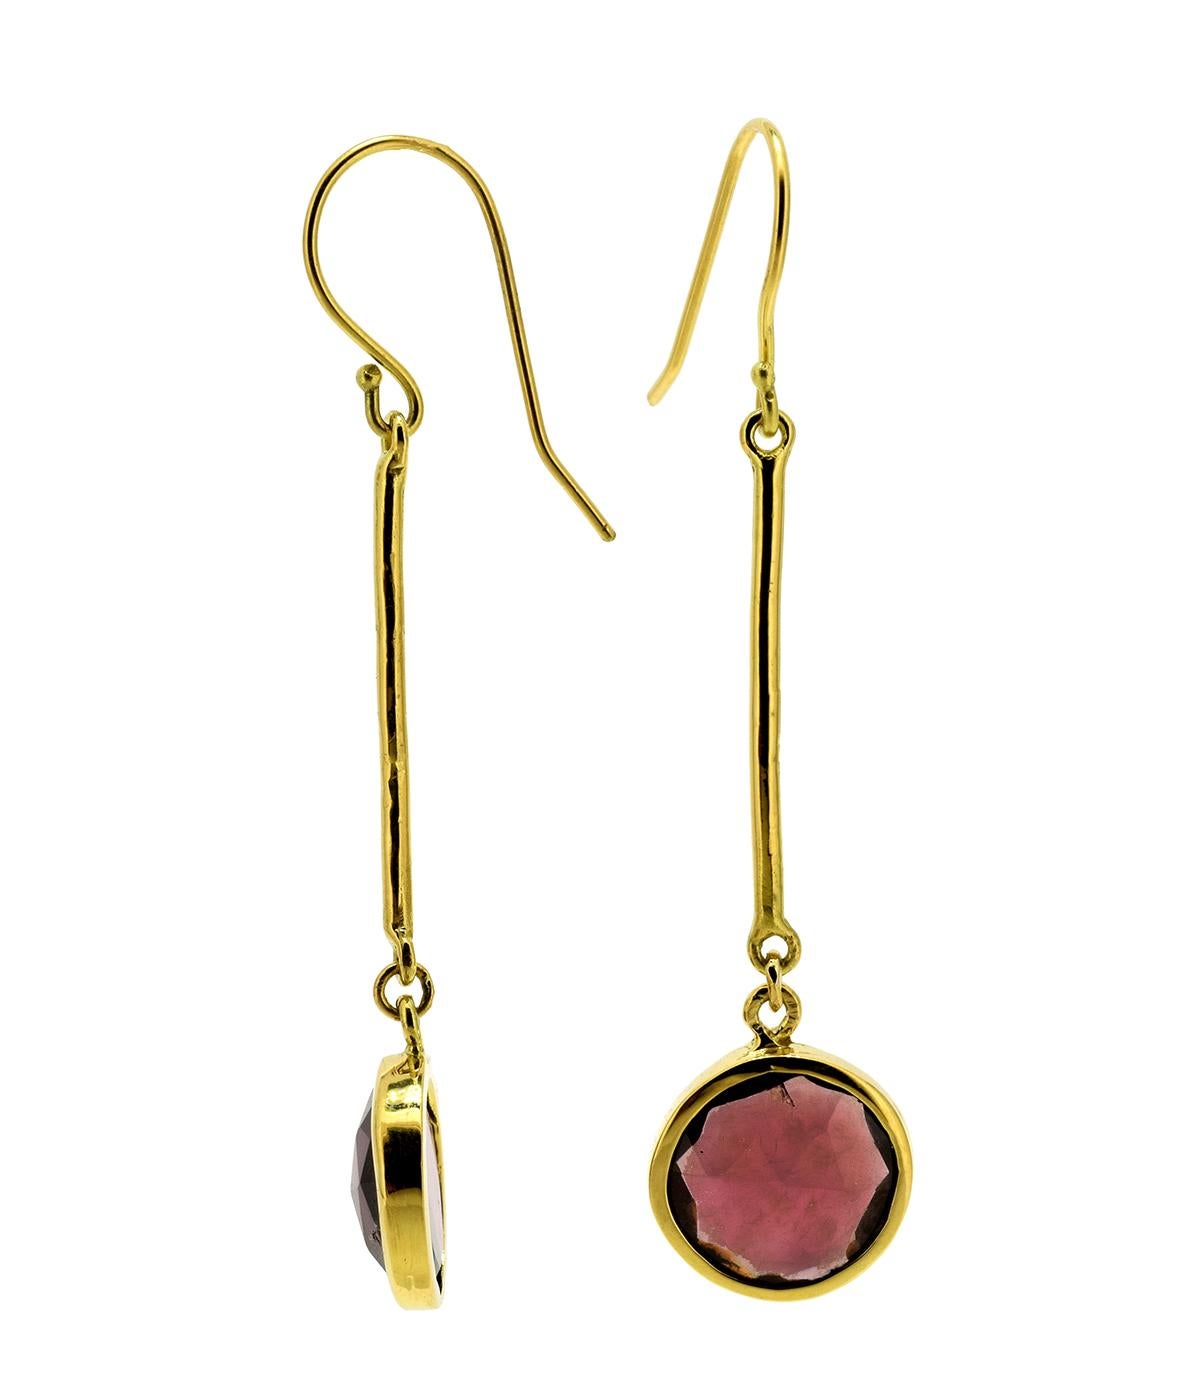 One-of-a-kind, 10mm round rosy faceted Rhondolites, which are in the garnet family (the name is derived from the Greek 